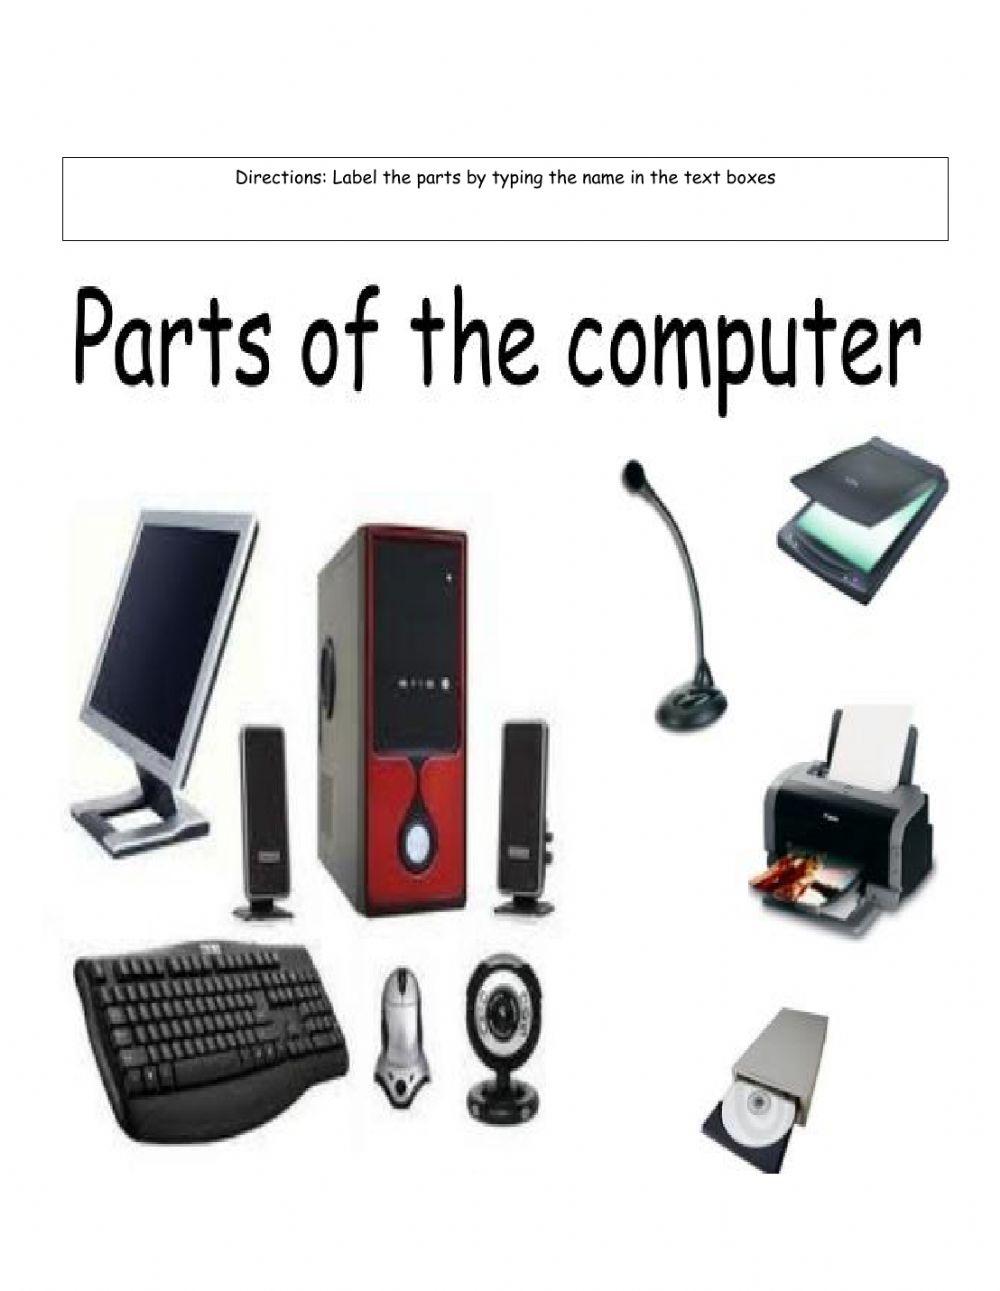 Parts of the computer